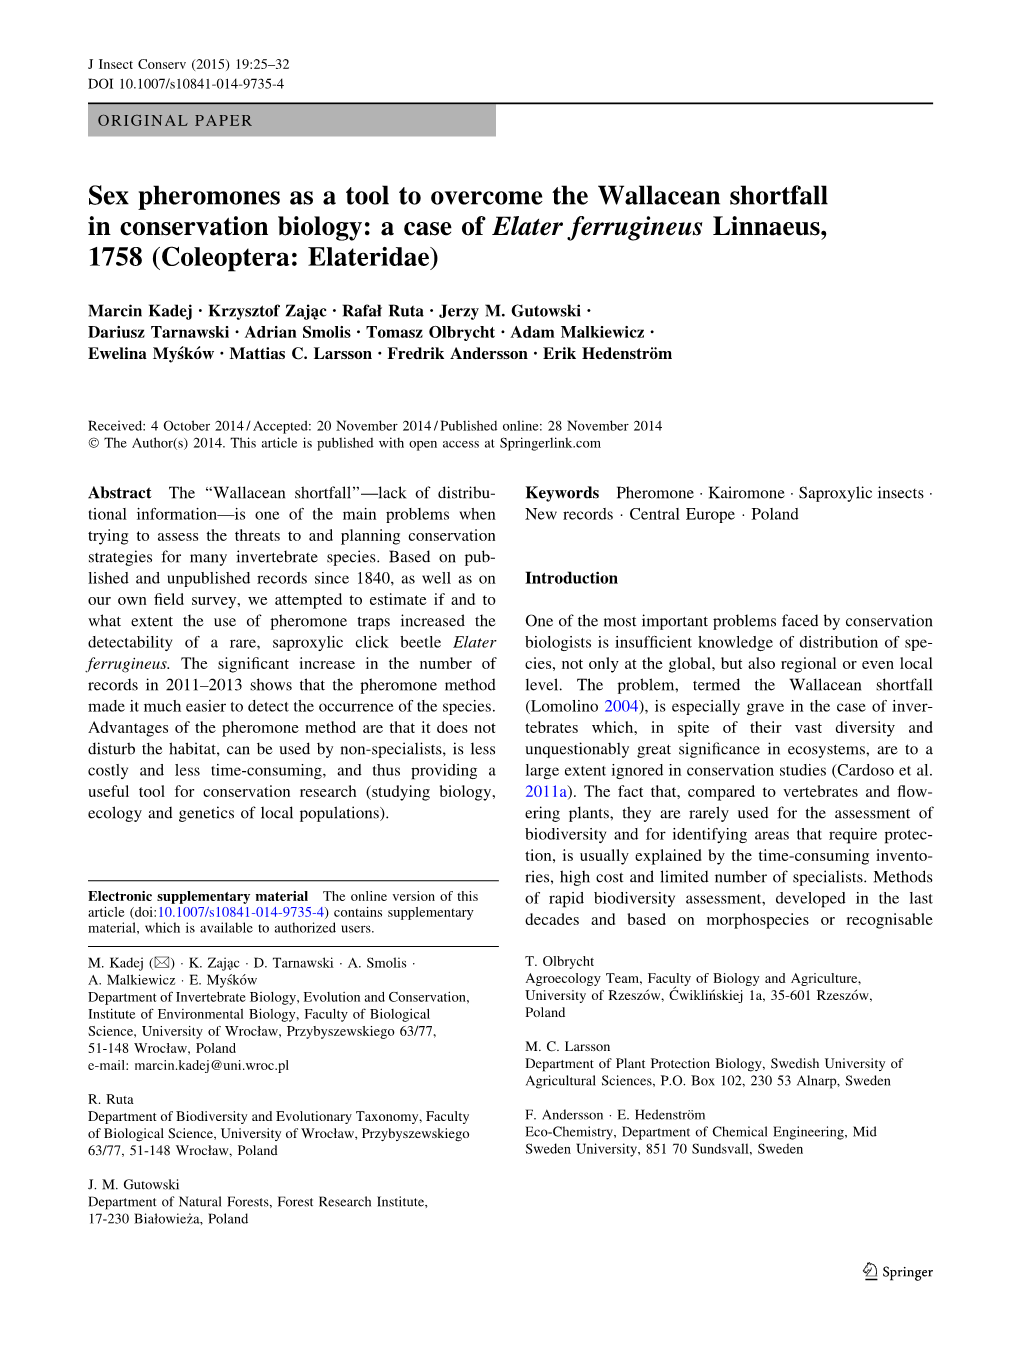 Sex Pheromones As a Tool to Overcome the Wallacean Shortfall in Conservation Biology: a Case of Elater Ferrugineus Linnaeus, 1758 (Coleoptera: Elateridae)